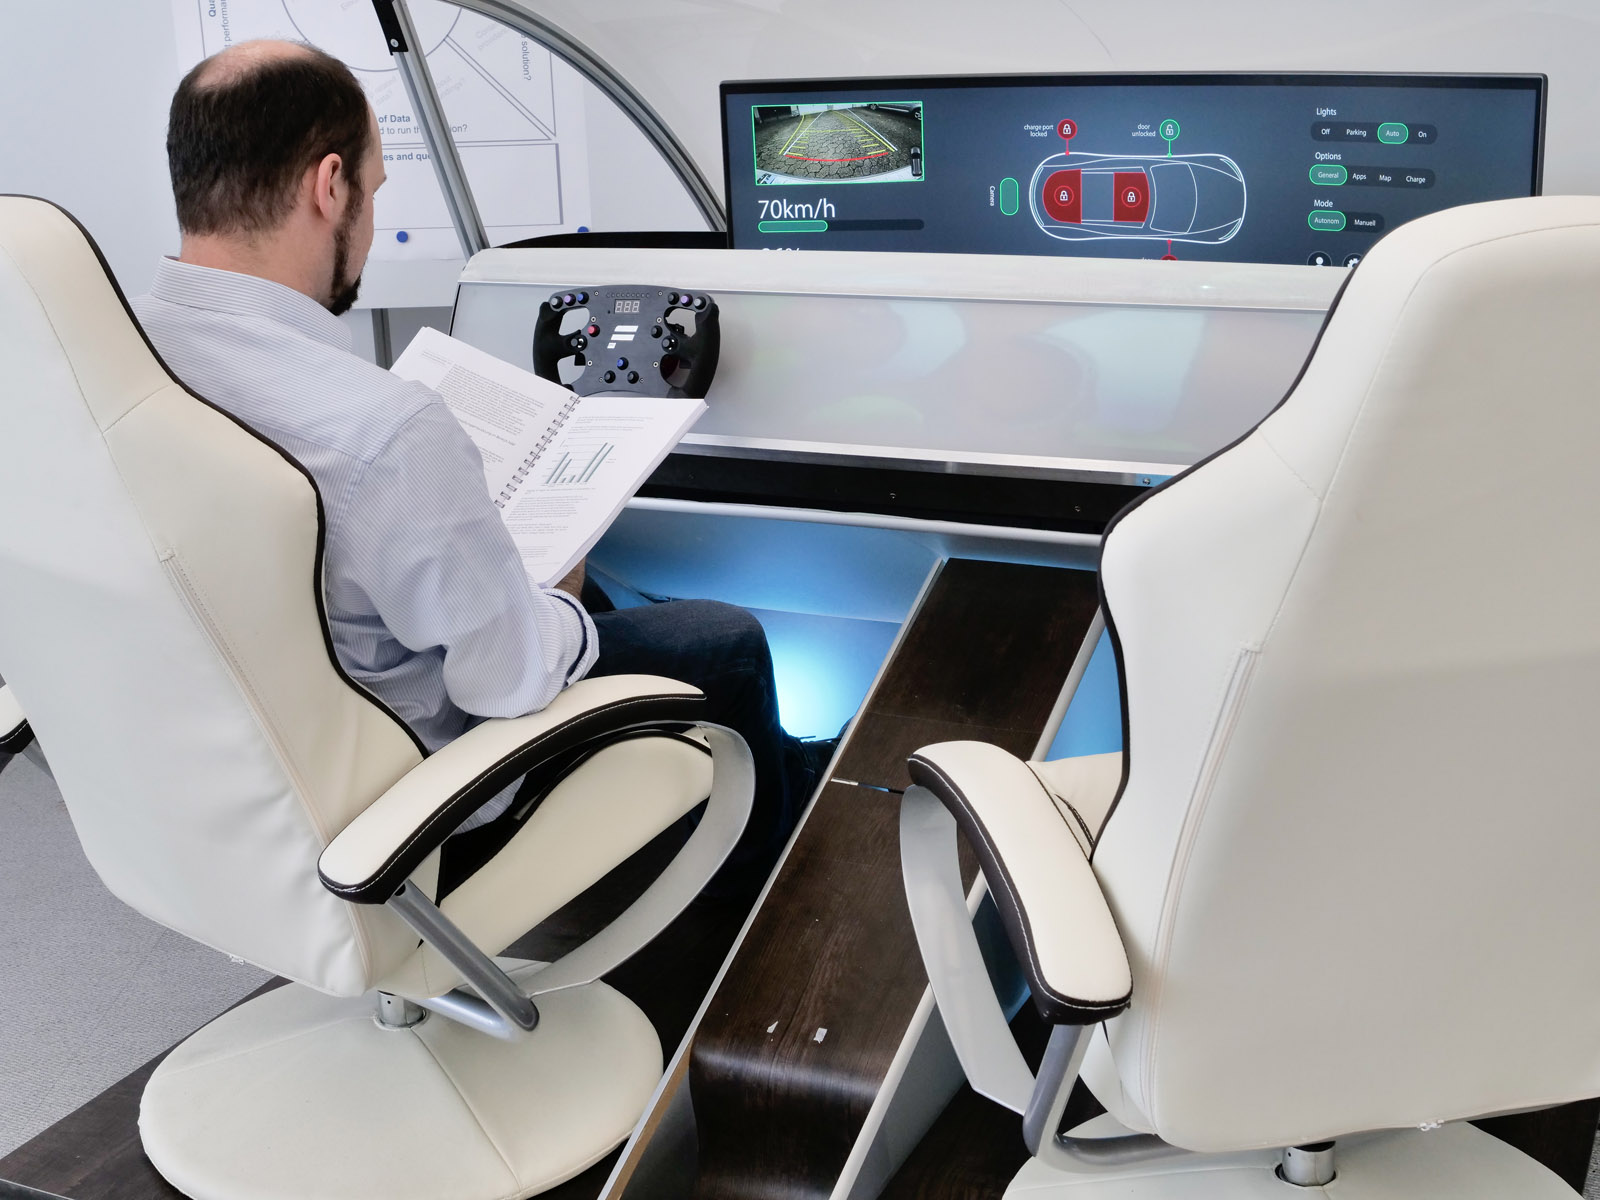 Fraunhofer IAO’s Mobility Innovation Lab showcases the mobility of the future with a futuristic interior that features a modular dashboard, windows made of switchable glass, reclining seats, fold-out tables and a pull-out monitor.